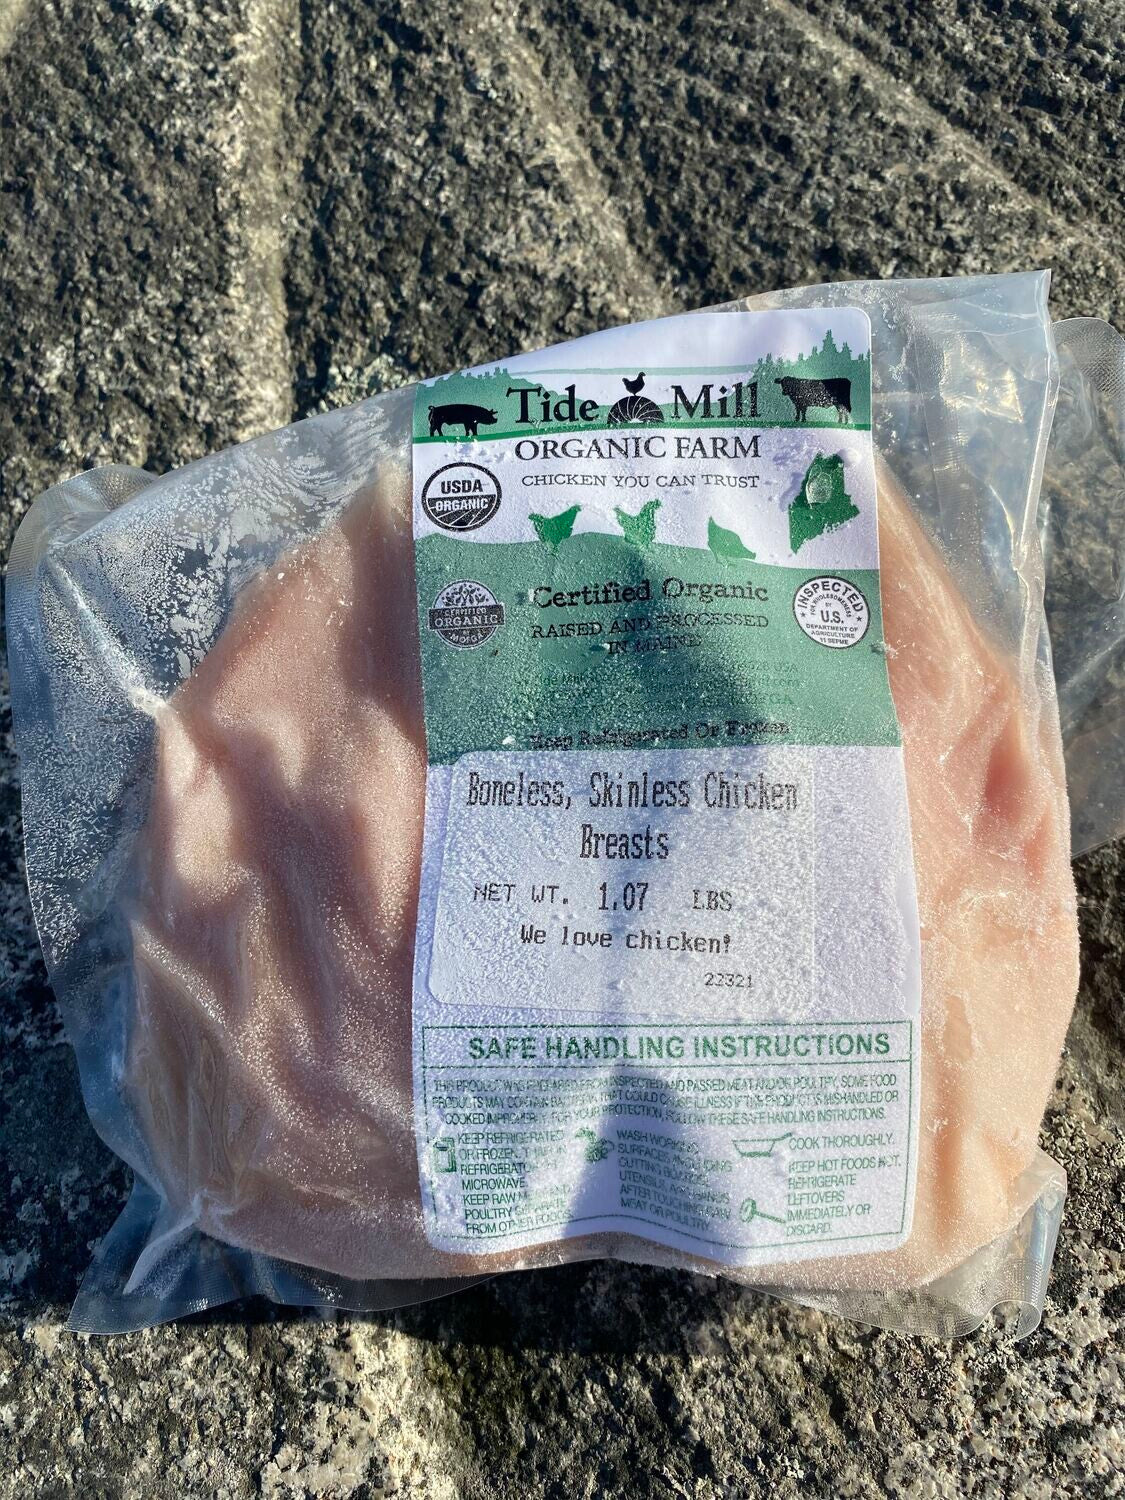 A package of organic boneless skinless chicken breasts